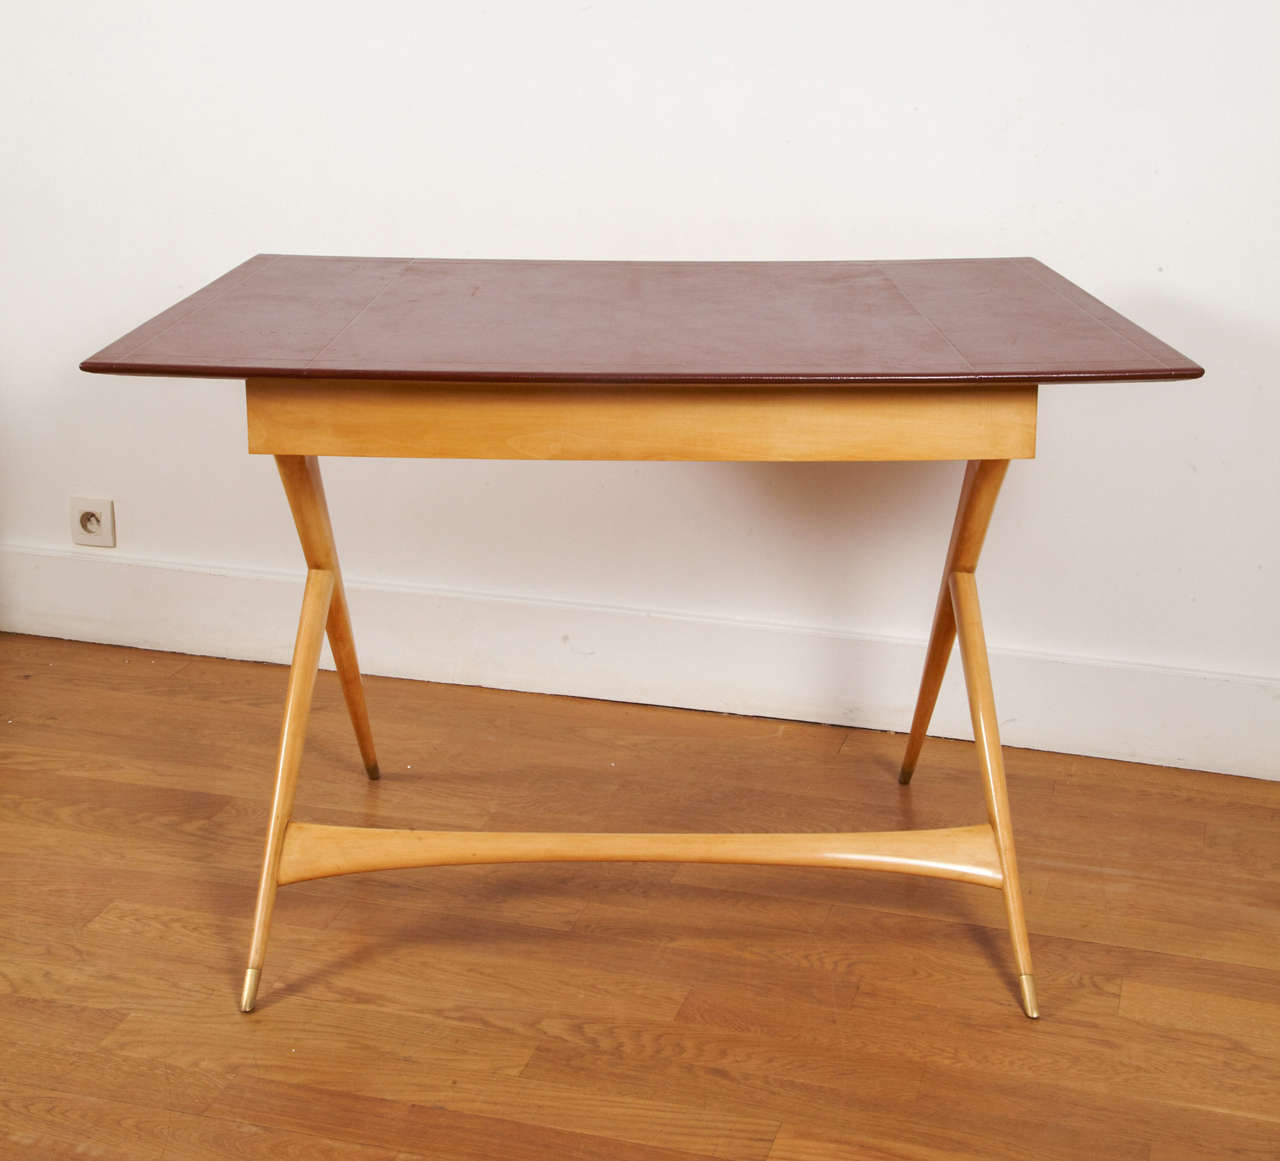 Sycamore desk with Brown leather gained top, by Jules Leleu, 1959.
Curved rectangular shape. Compass base. One central drawer.
Gilt bronze sabots. Signed and numbered.
Front width 106 cm.